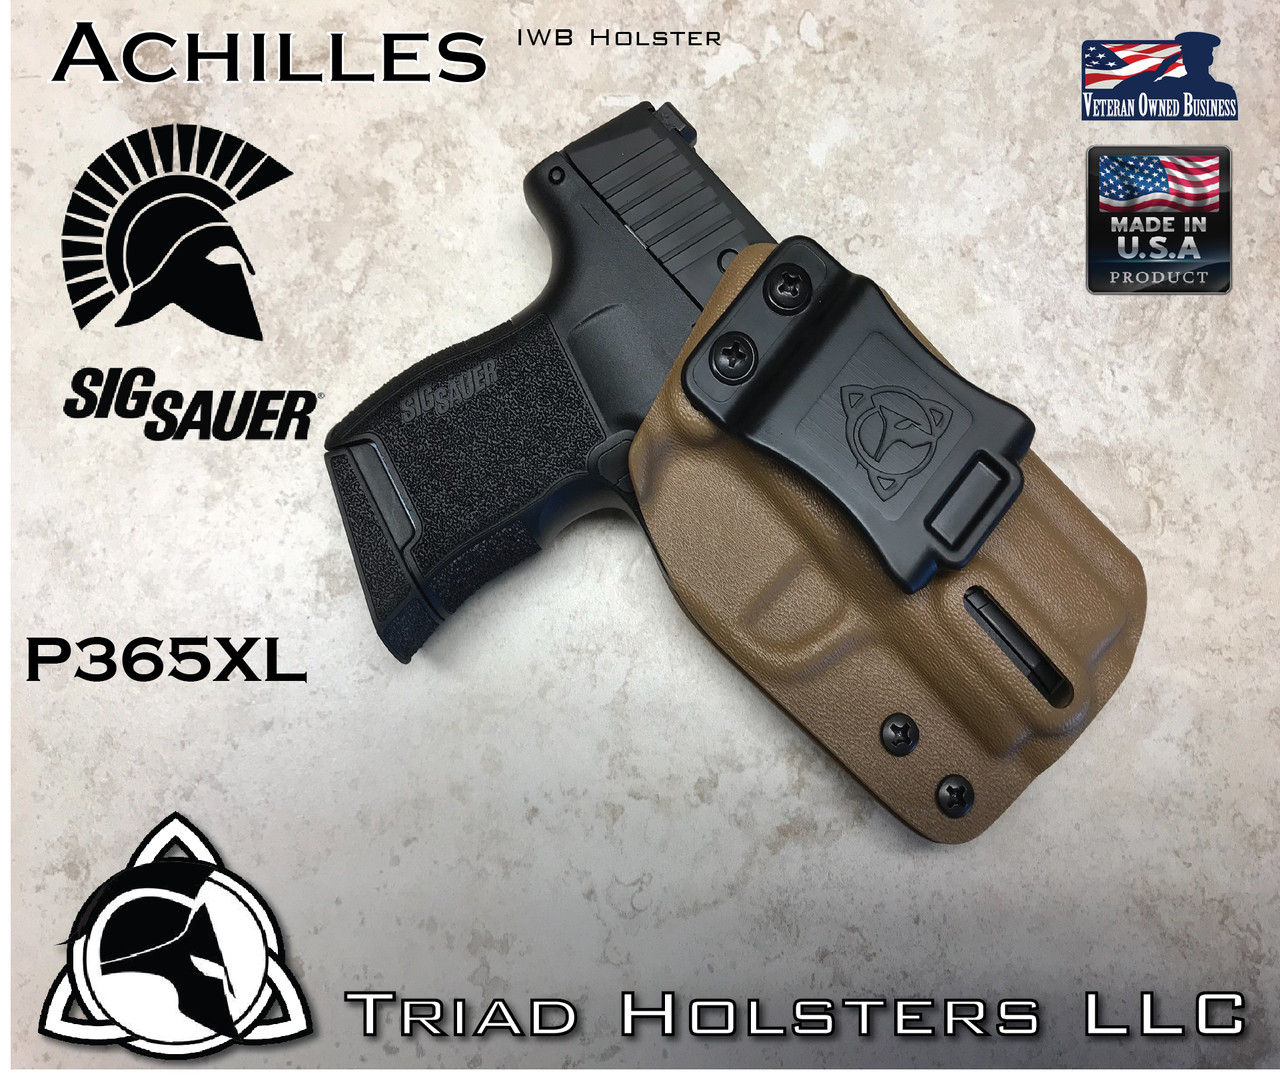 Kydex IWB Holster for Sig Sauer P365 XLUSA MadeLifetime Guarantee